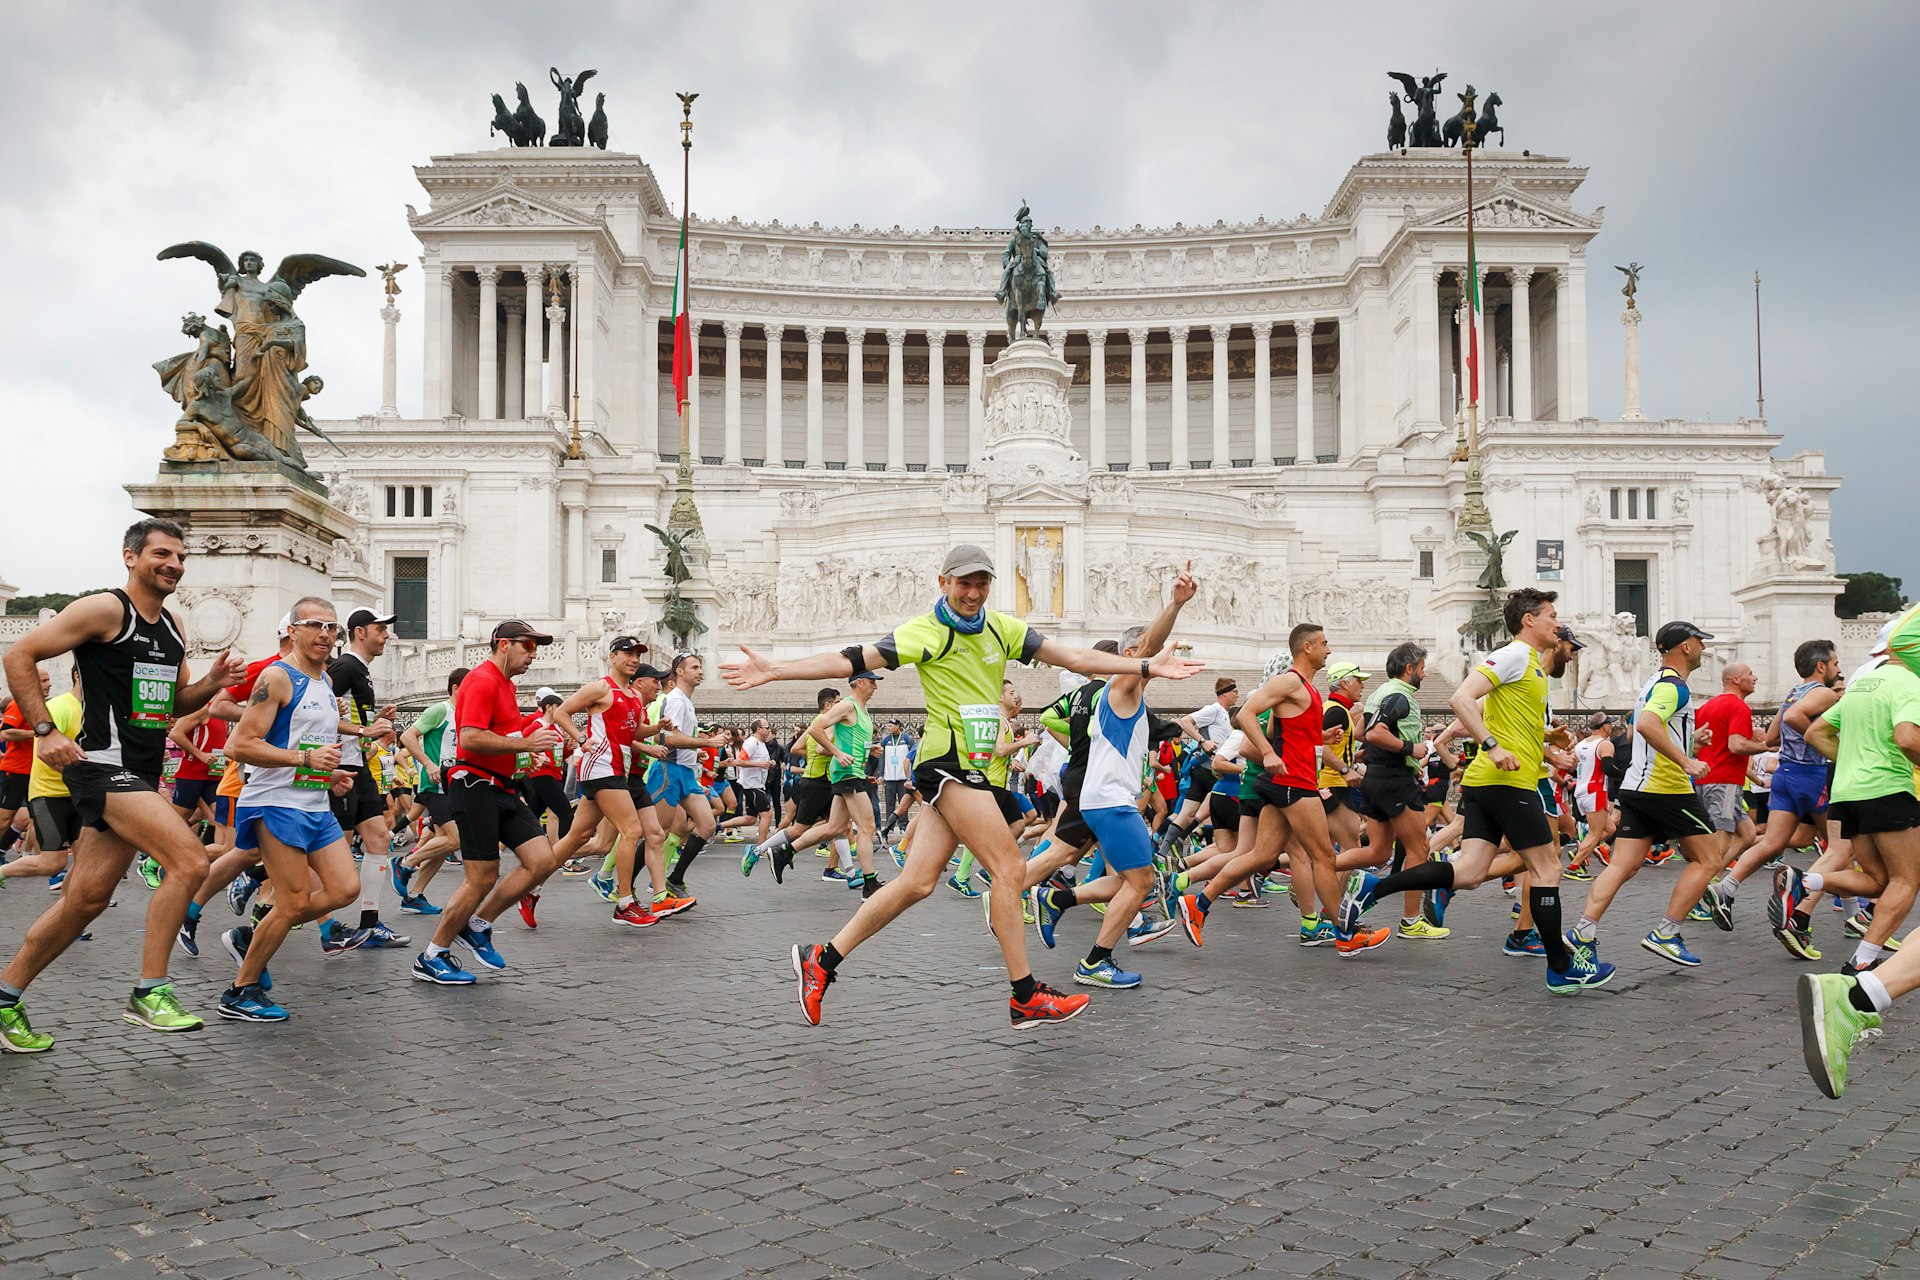 Runners run in the Rome marathon passing a huge white building with columns and several massive brass sculptures